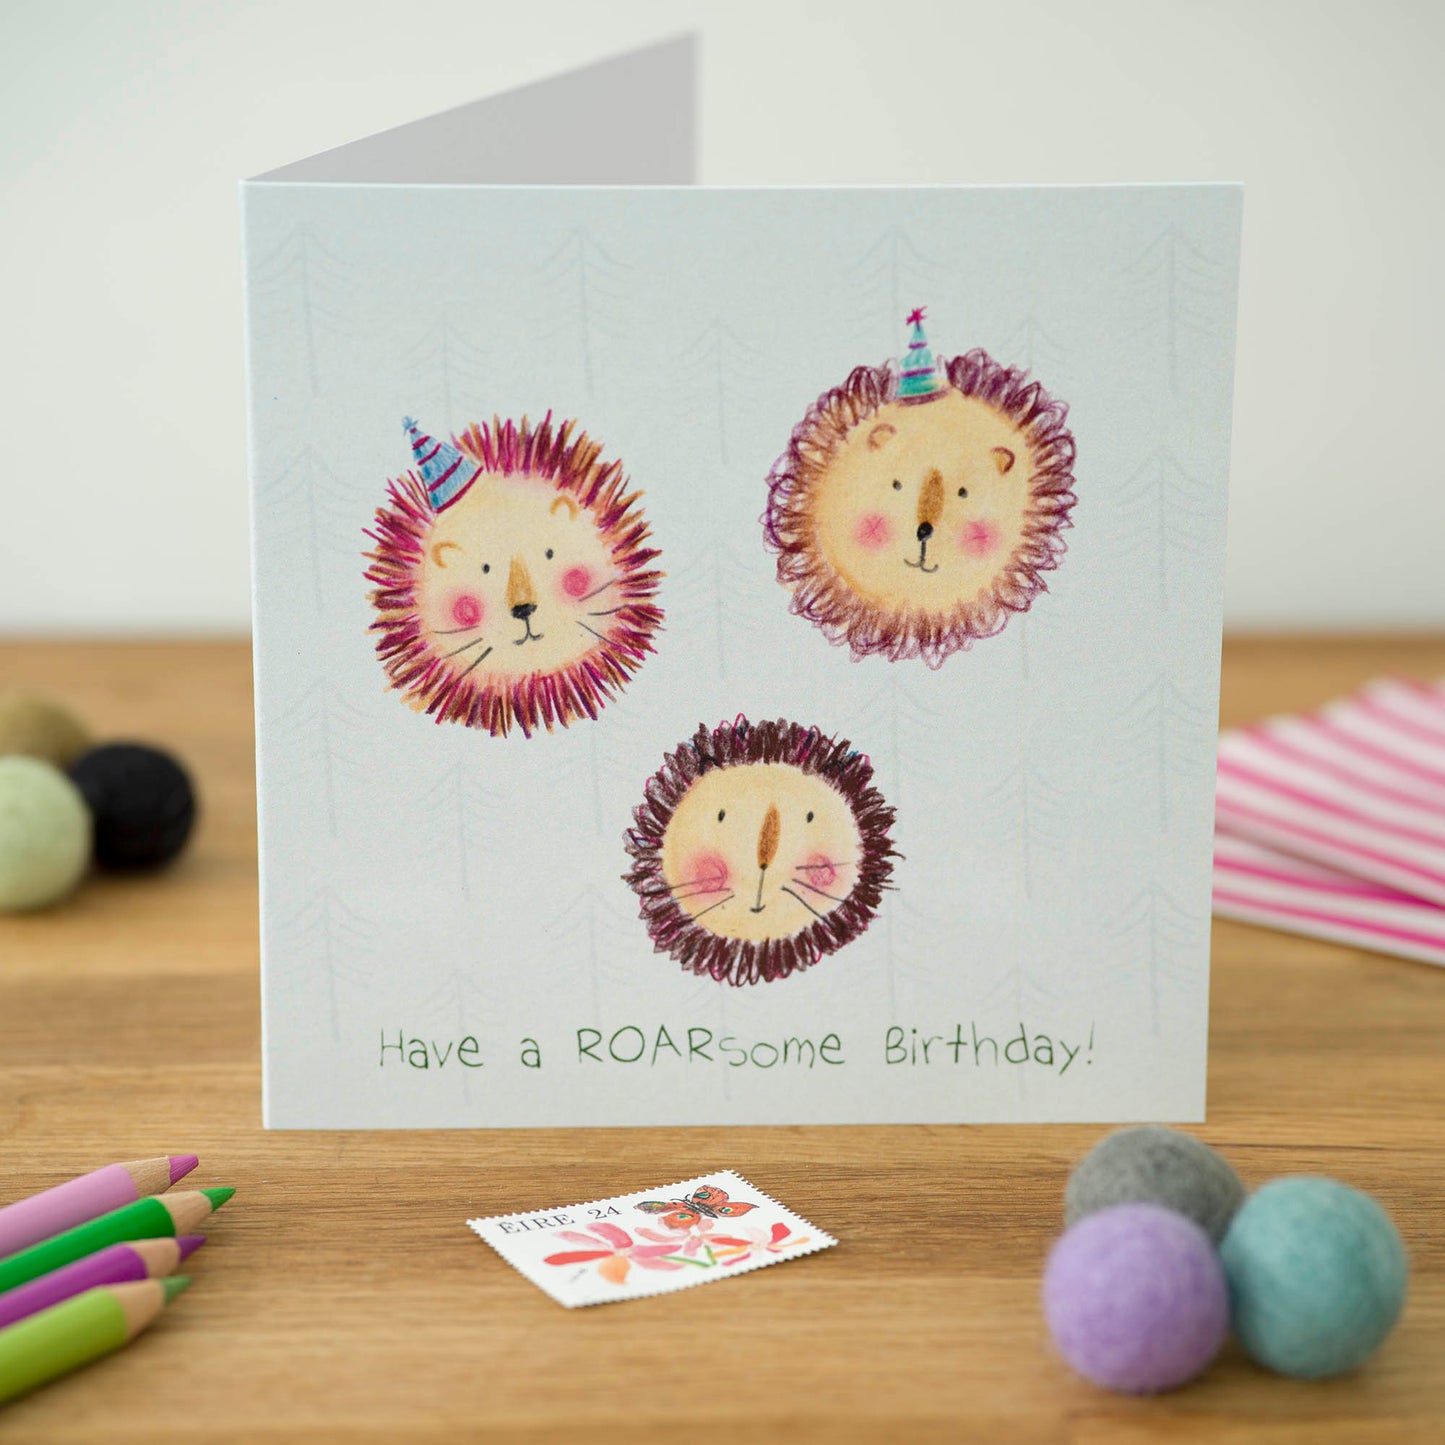 Have a Roarsome Birthday, Greeting Card